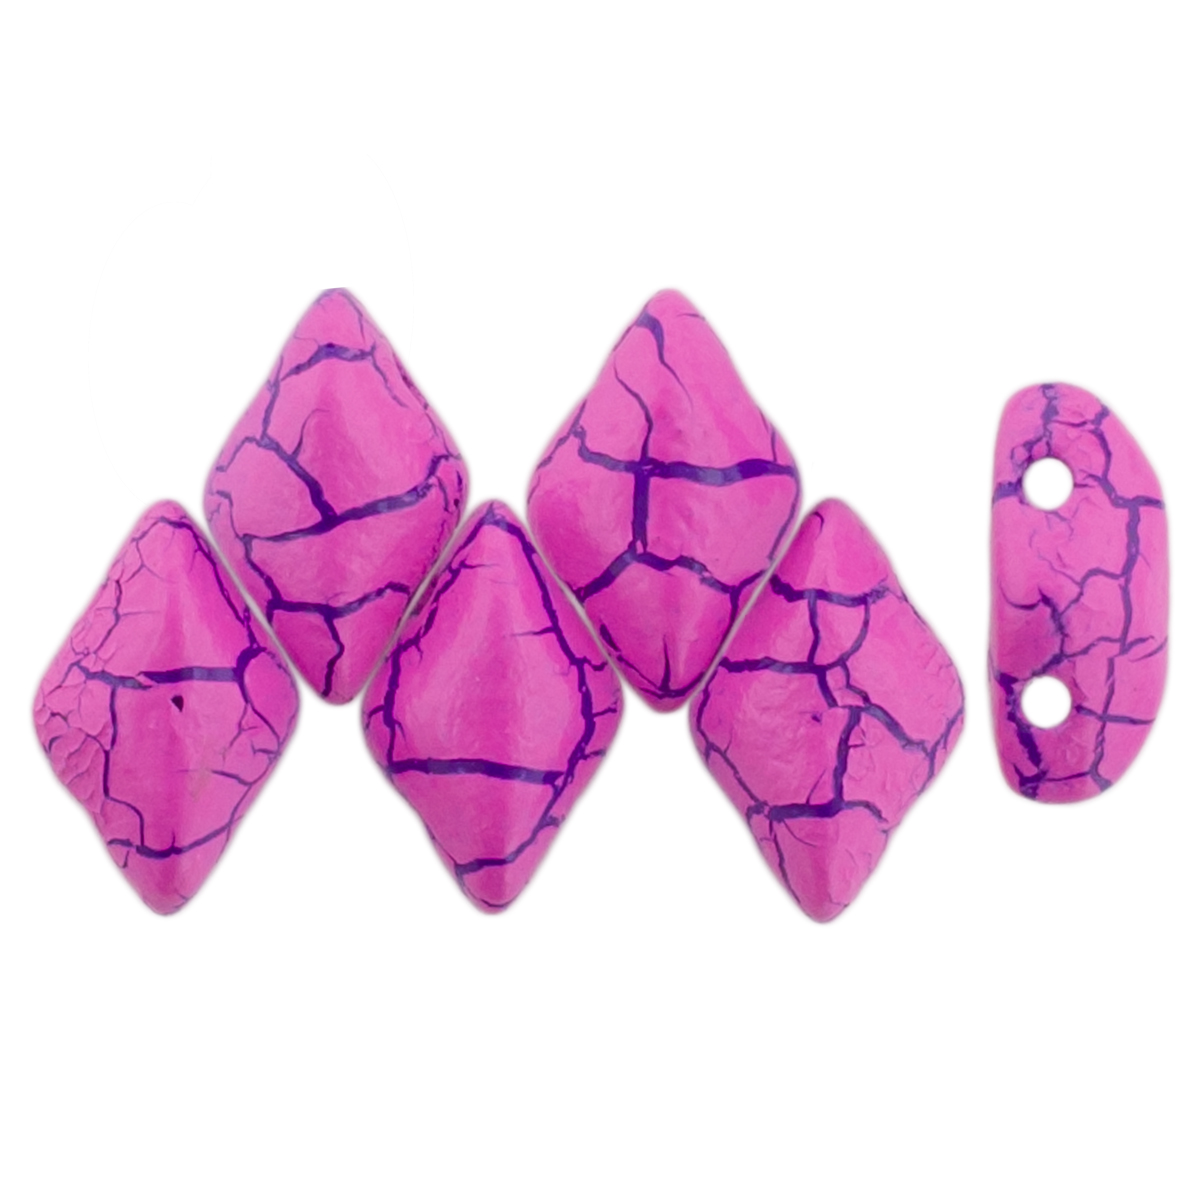 GEMDUO 8 x 5mm : Colortrends: Ionic Pink/Blue